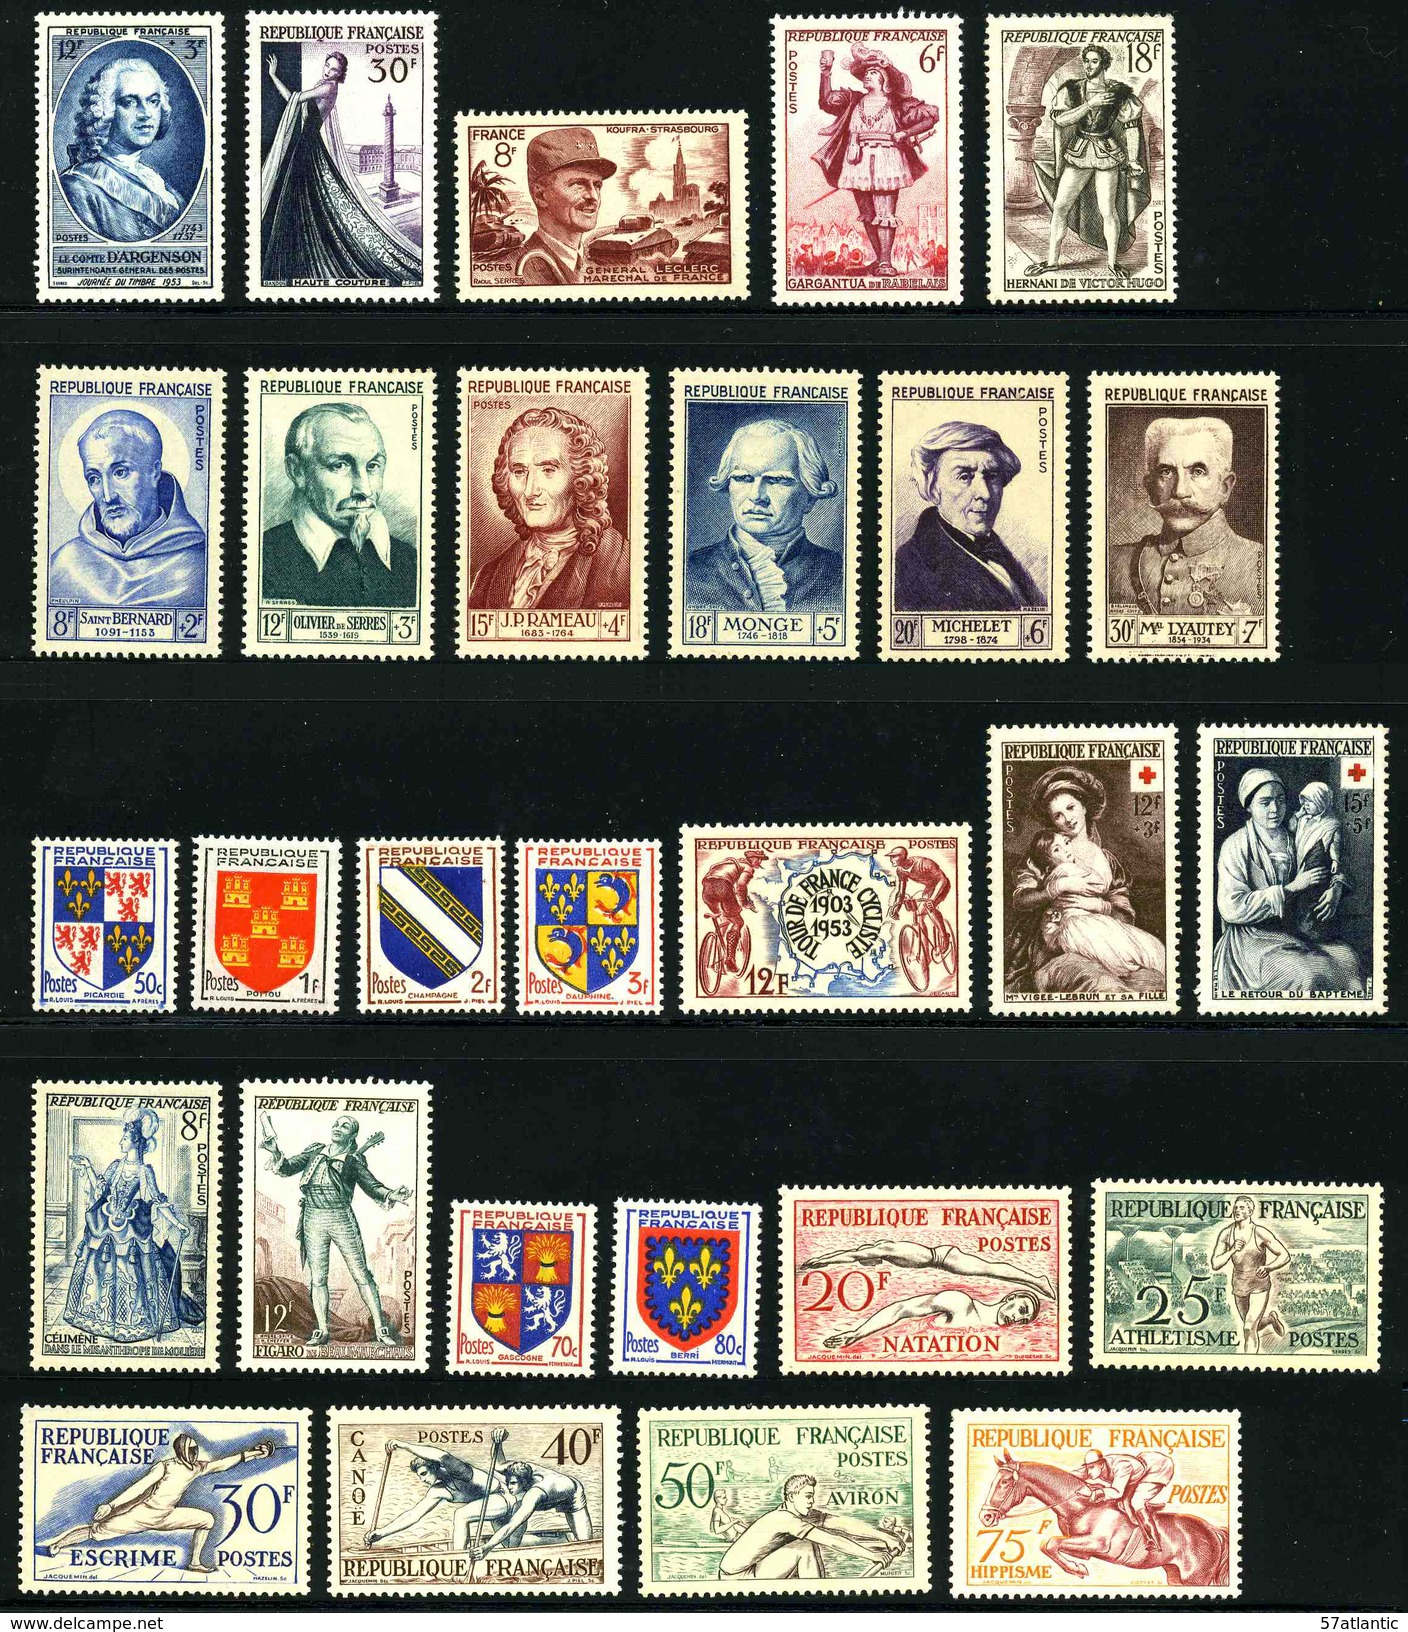 FRANCE - ANNEE COMPLETE 1953 - YT 940 à 967 ** - 28 TIMBRES NEUFS ** - 1950-1959